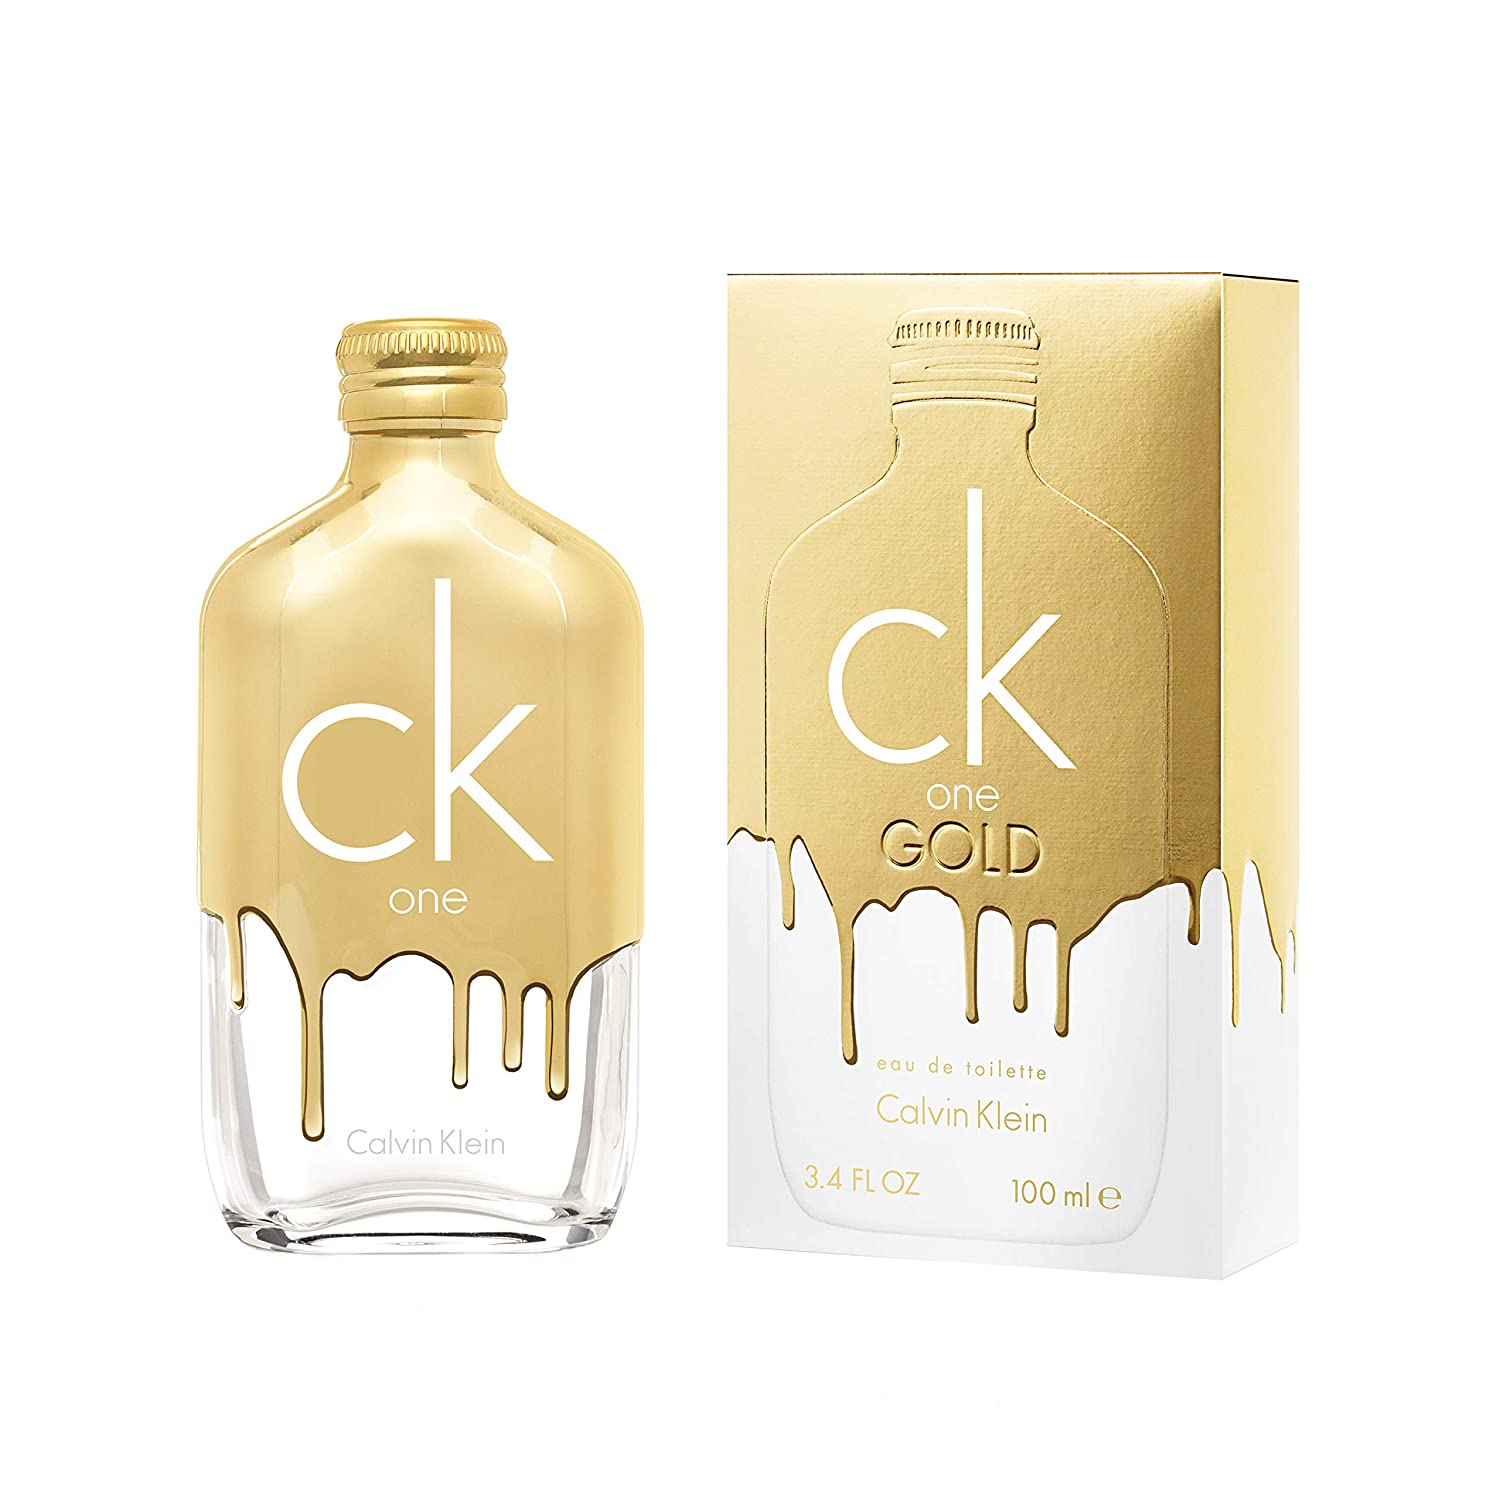 Bold. Gilded. Unapologetic ck one gold is a tribute to the youth who can do no wrong. Everything they touch turns to gold. Unconstrained by traditional gender norms, ck one gold fuses the energy of both sexes in one unisex fragrance. A singularly captivating scent that promises a drop of gold for everyone. The juicy top note of fig creates instant fascination with its energetic freshness. The bright heart of neroli is the sparkling crown which shines like the last rays of the setting sun on the city. The sun-drenched base of vetiver gives depth, leaving a vibrant, sensual warmth on skin.